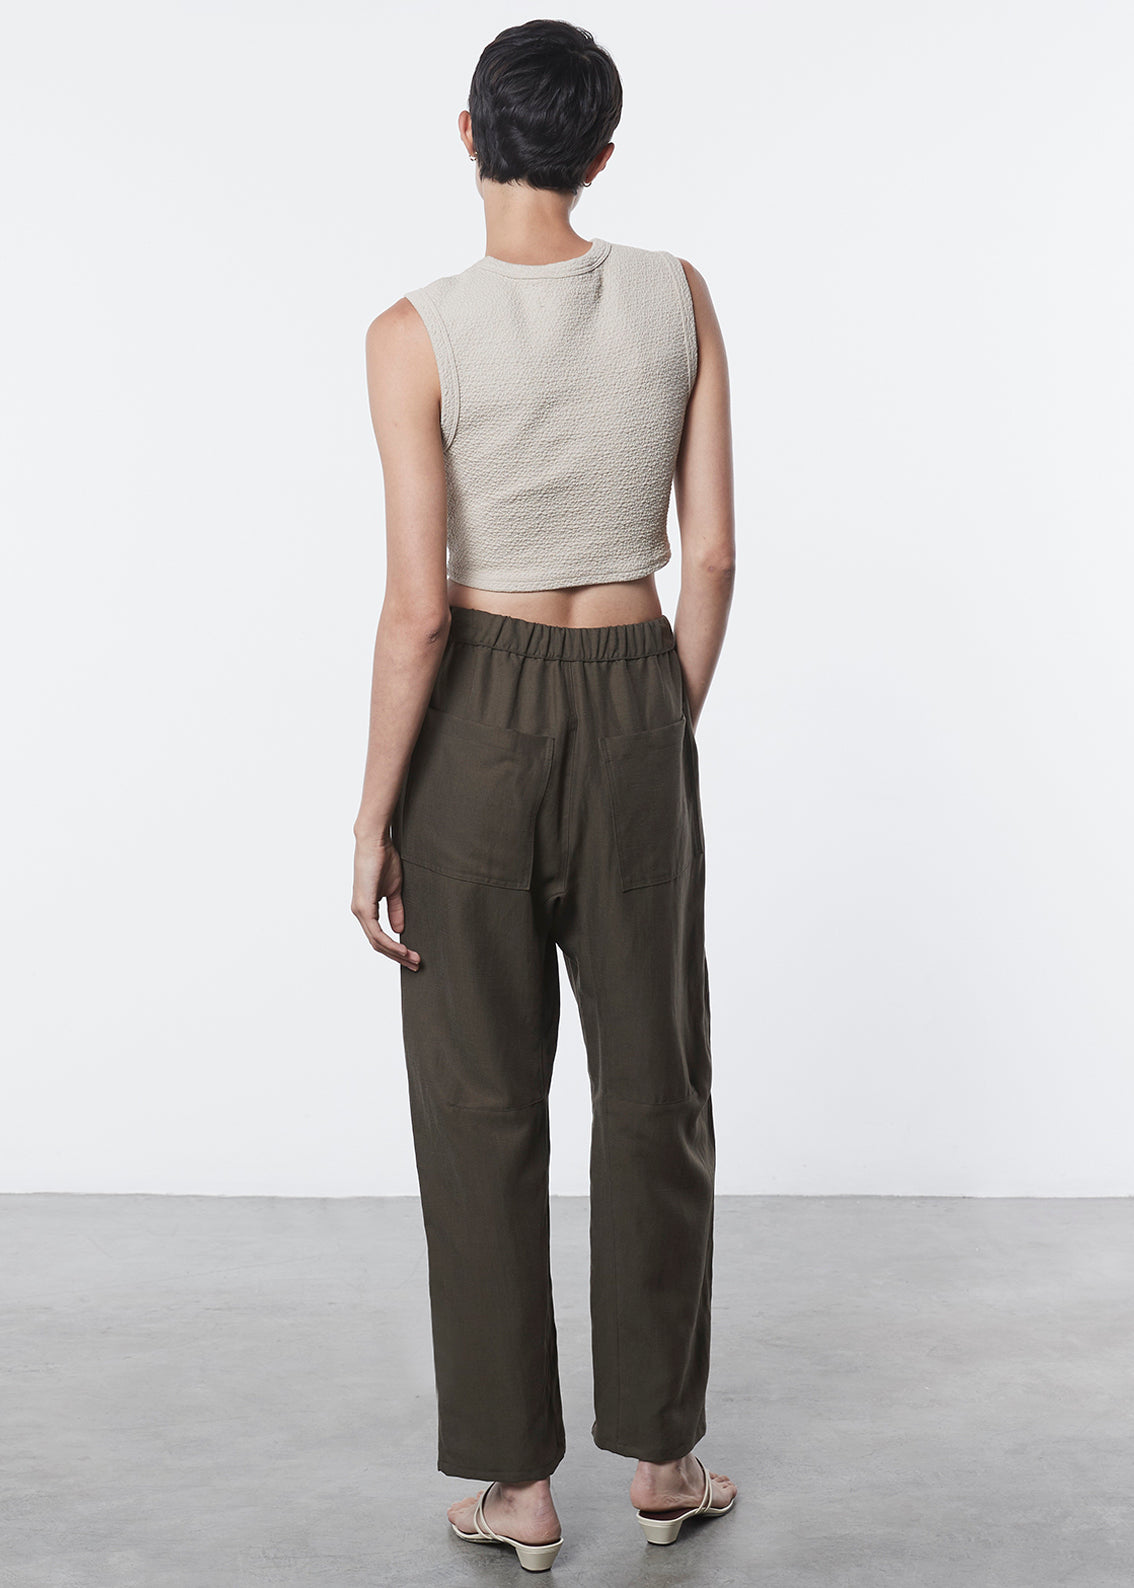 Twill Utility Pant | Military